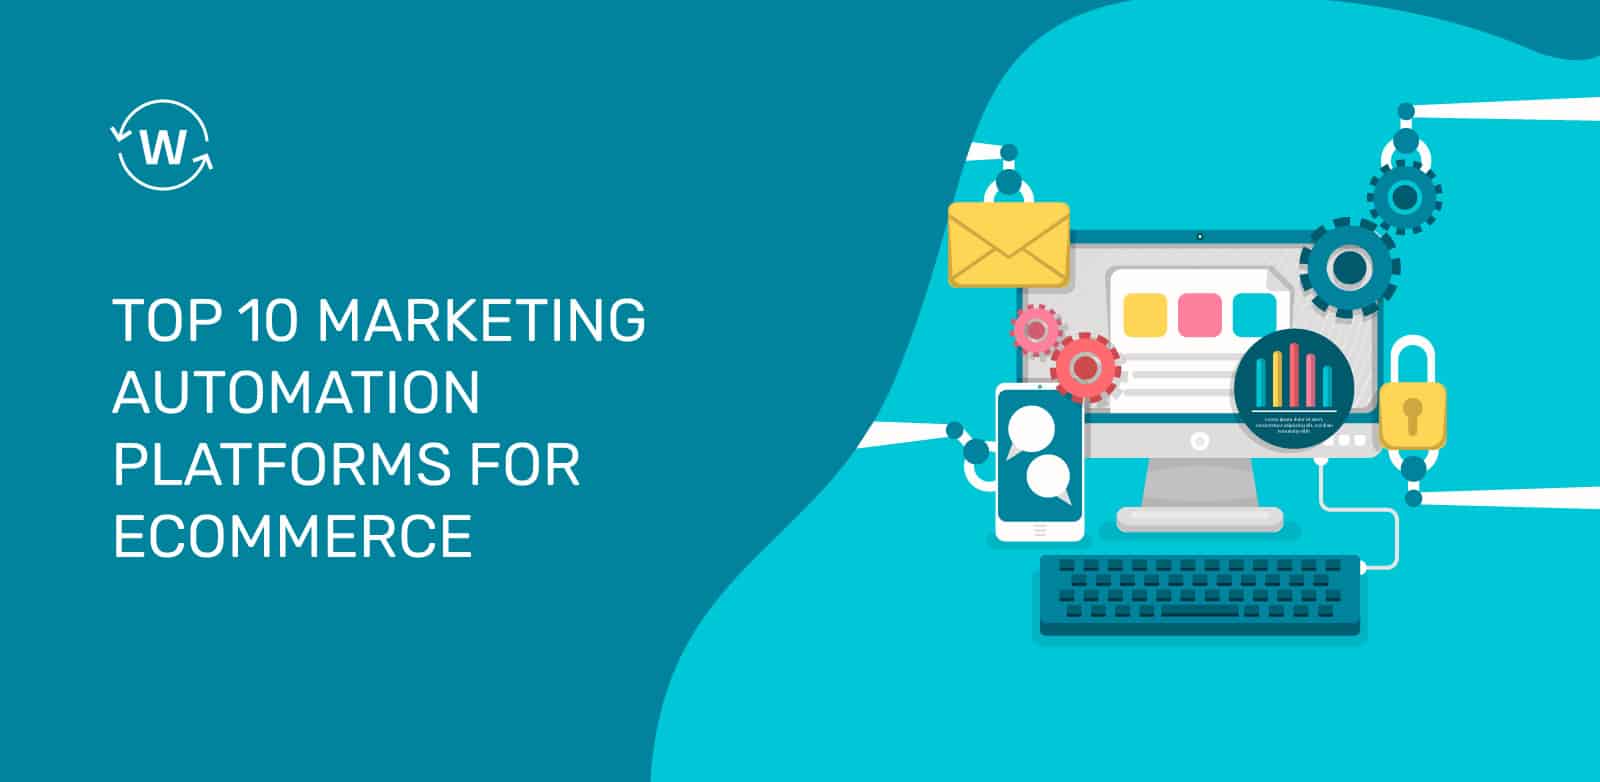 Top 10 Marketing Automation Platforms For eCommerce